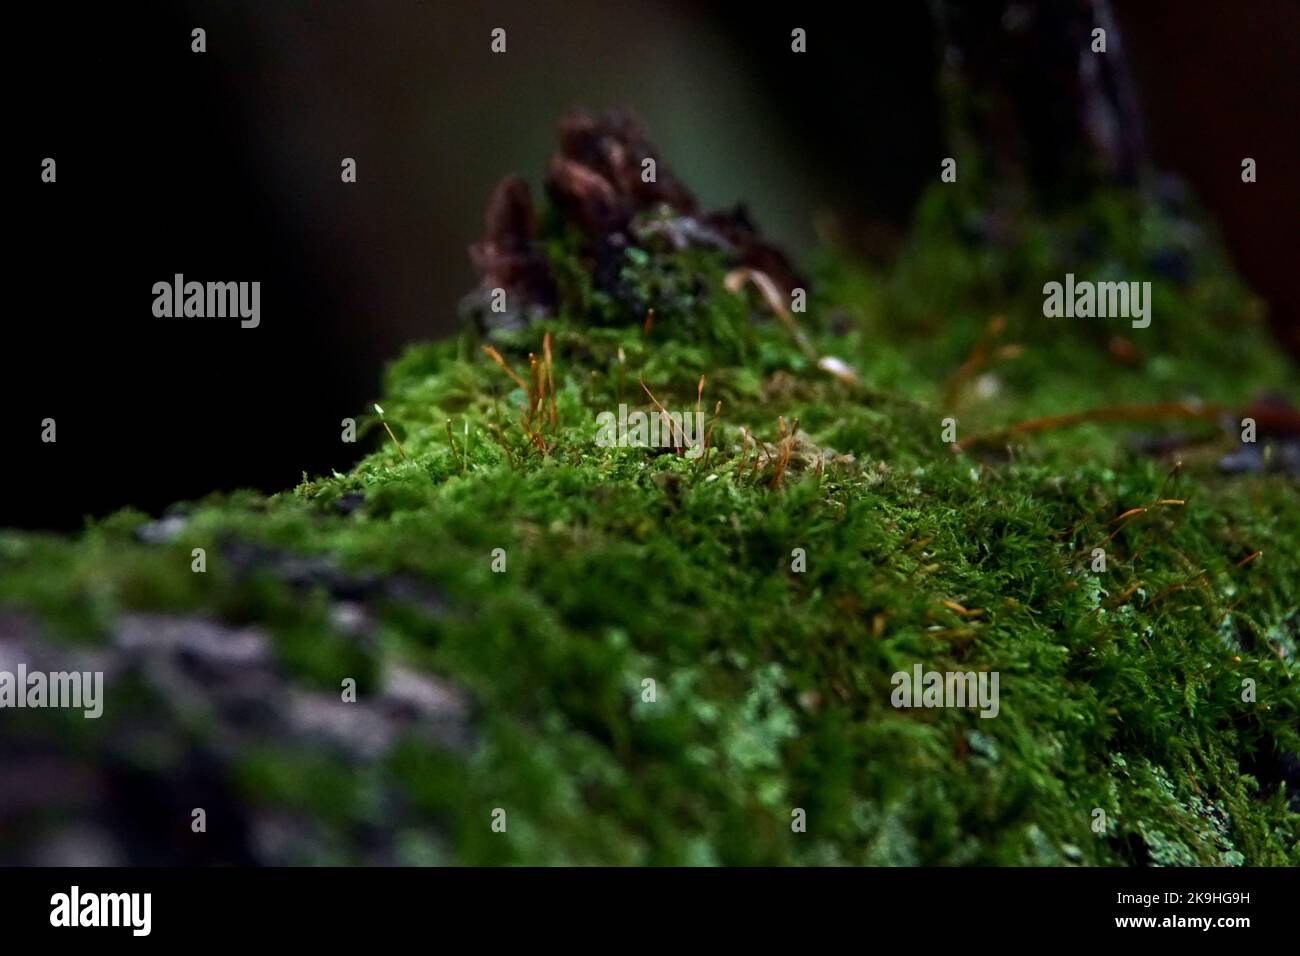 Close-up photograph of moss with sporangium on a tree branch Stock Photo